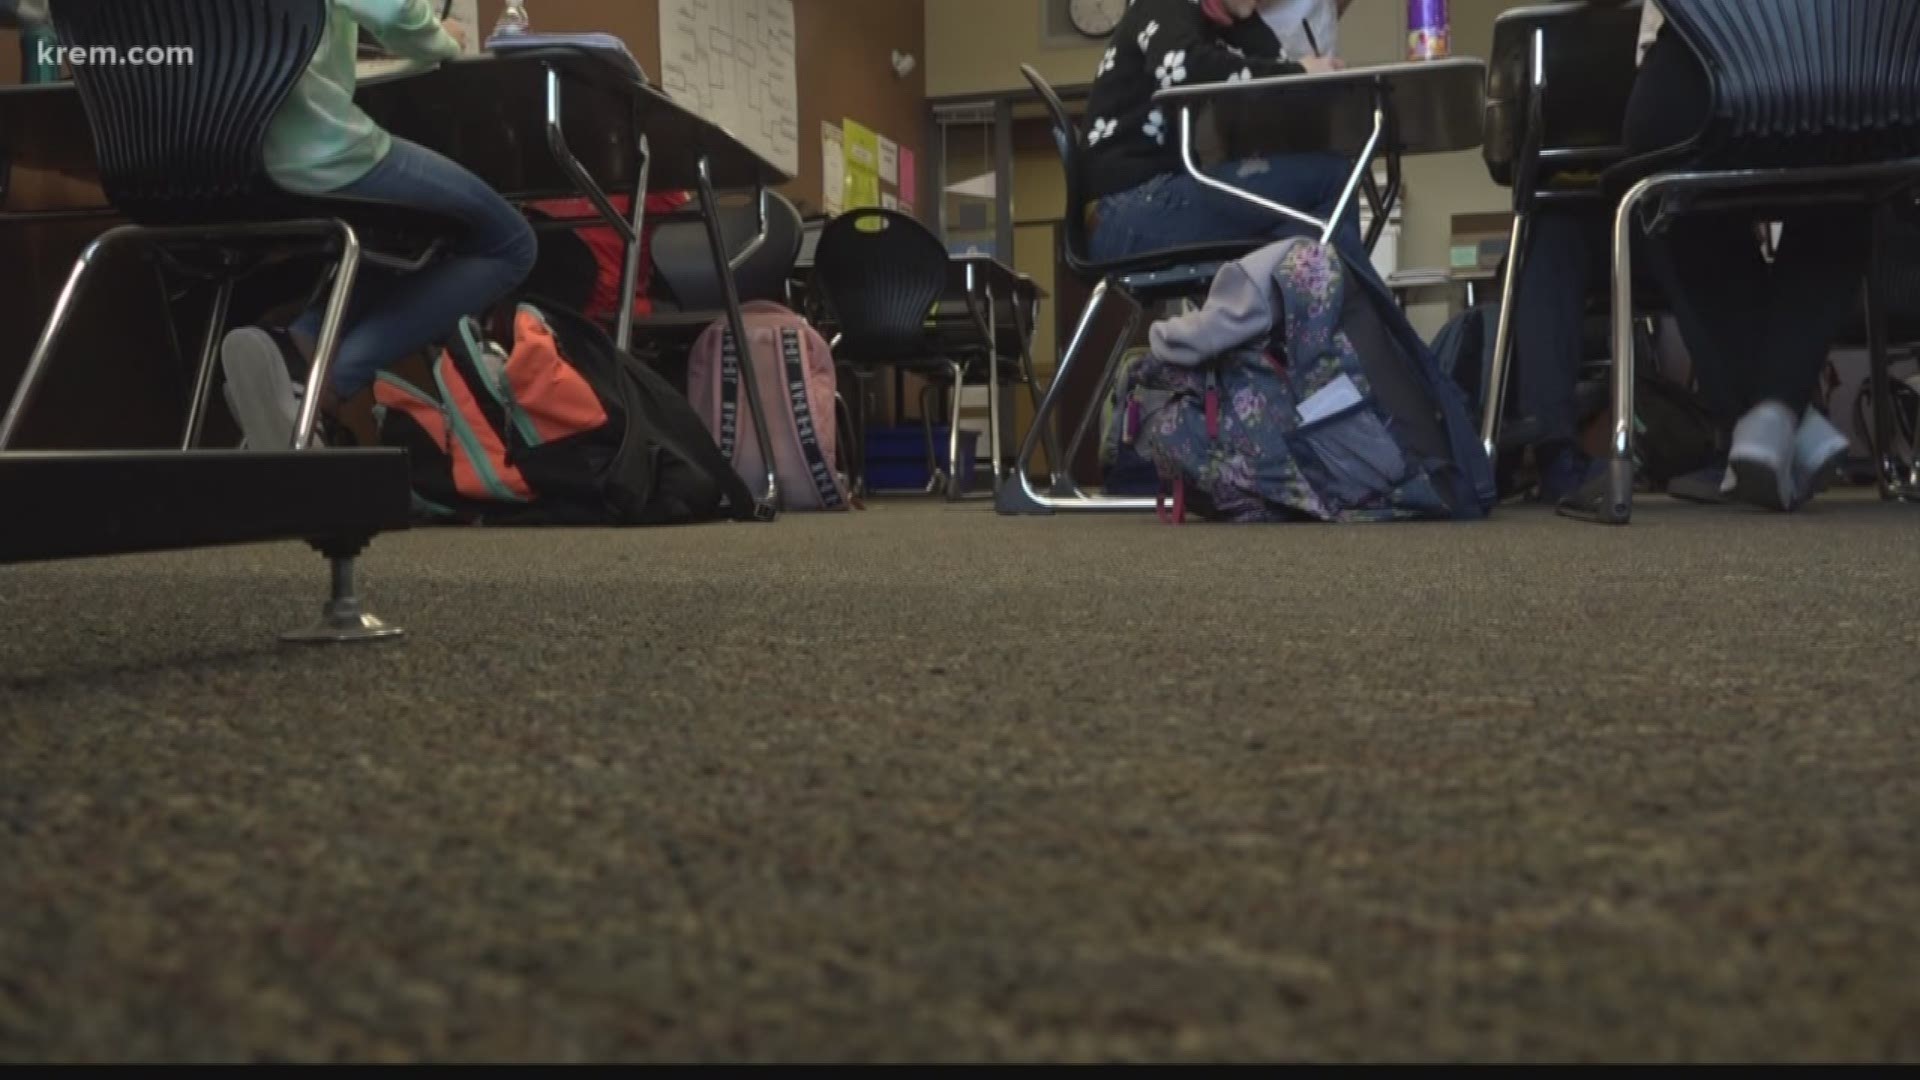 Spokane Public School leaders announced yesterday, they plan to cut more than 3-hundred jobs. KREM 2's Alexa Block spoke with lawmakers about the budget shortfalls school districts are reporting.